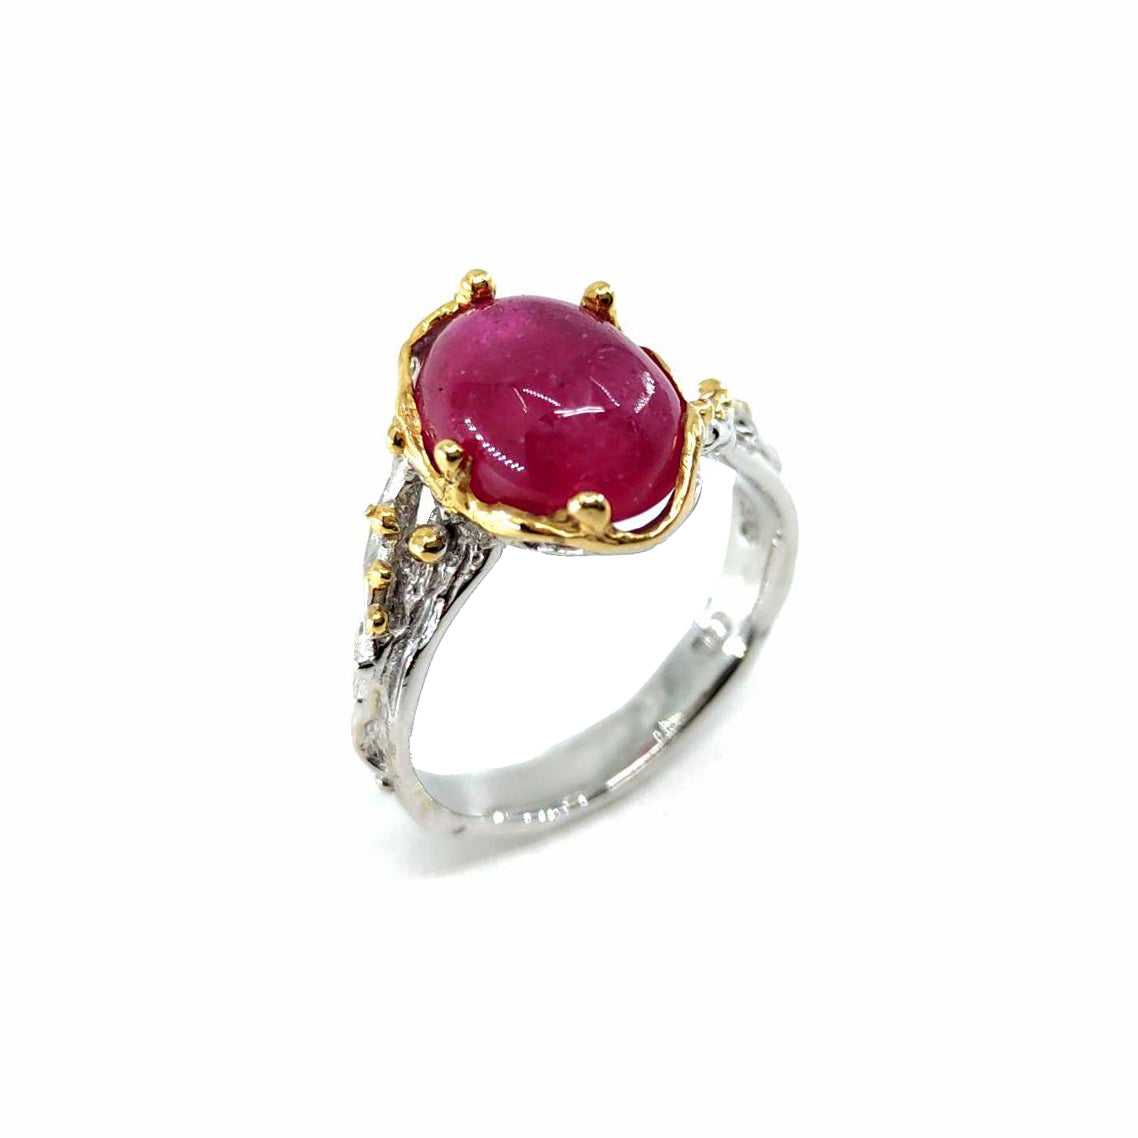 Alice - 925 Sterling Silver Ring Decorated with Ruby, Plated with 3 Micron 22k Yellow Gold And  White Rhodium